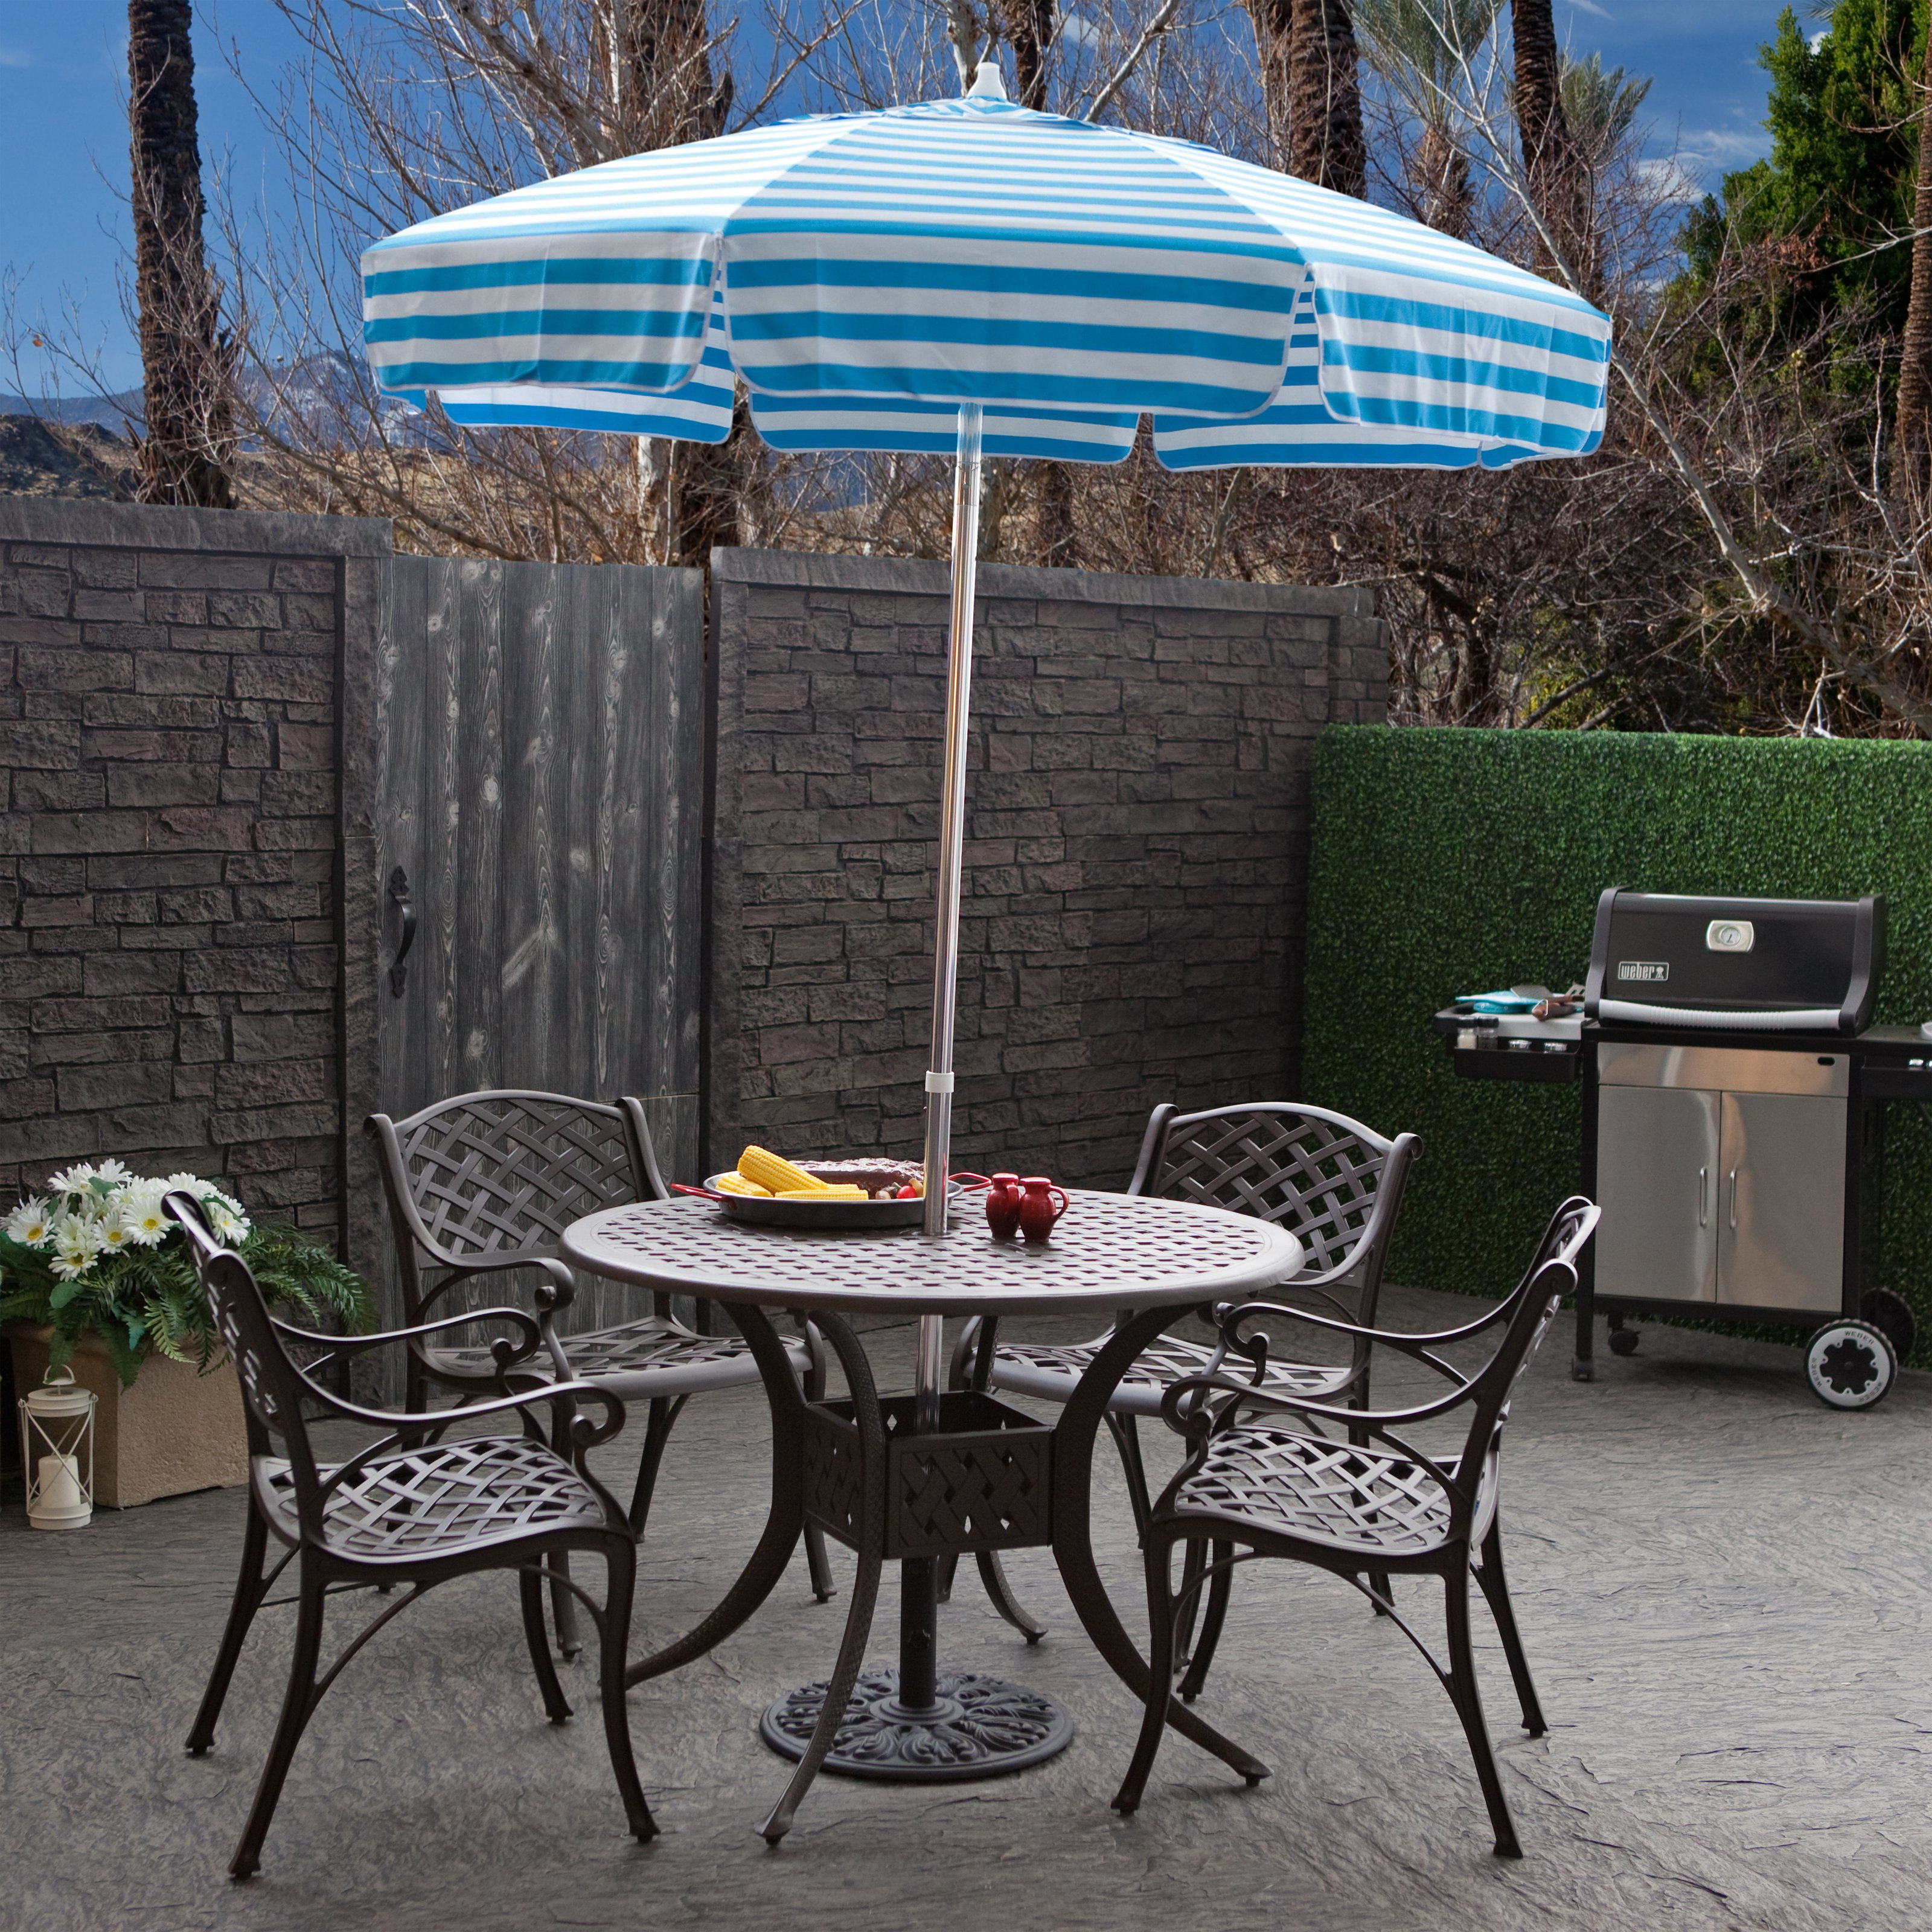 Incredible Patio Table Umbrellas Destinationgear 6 Ft Aluminum intended for dimensions 3200 X 3200